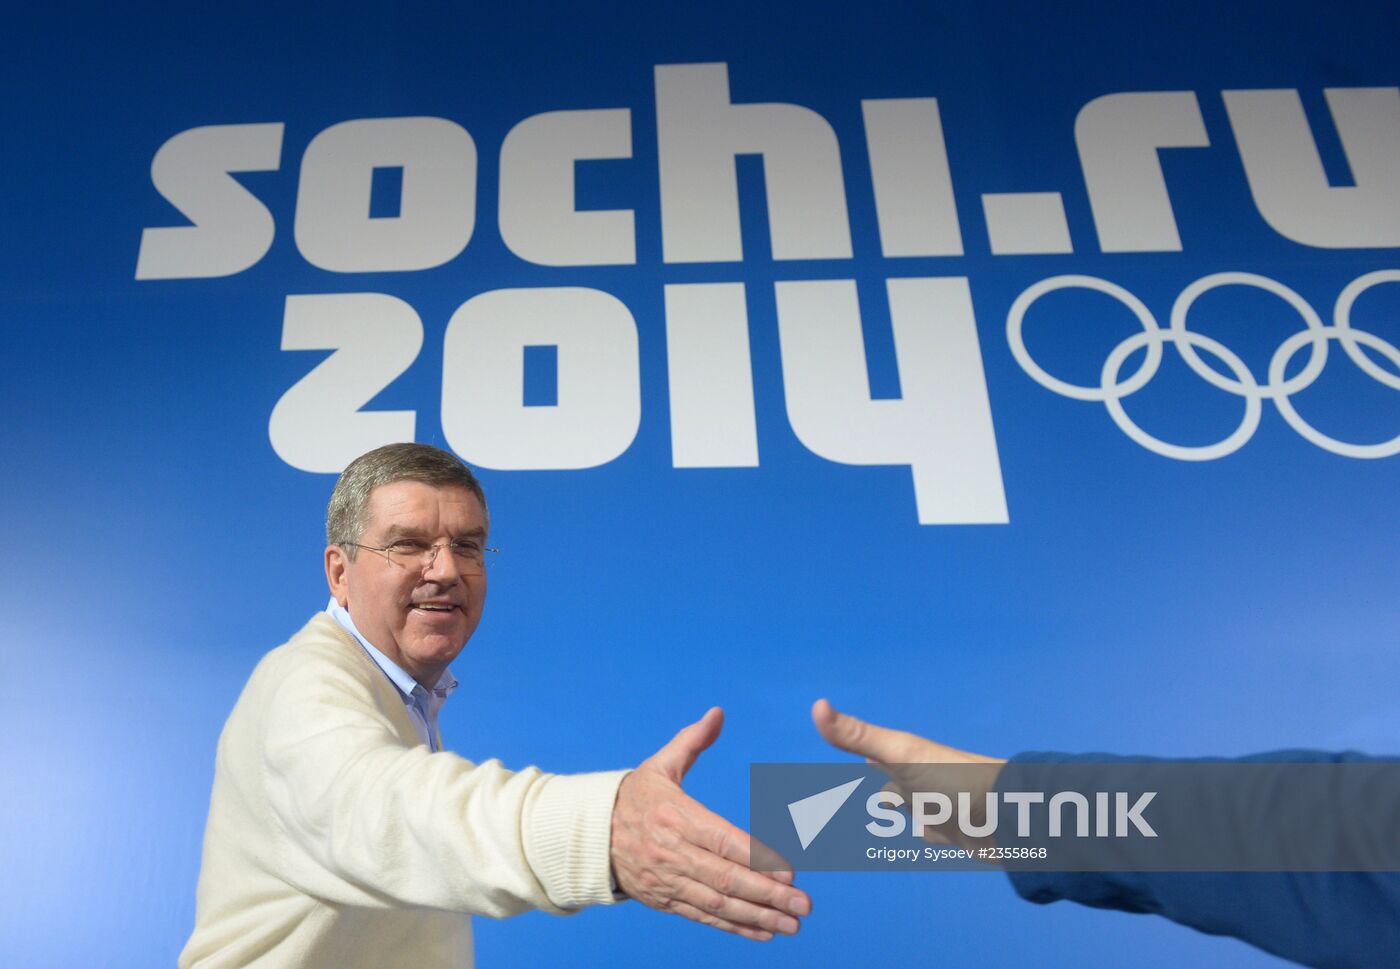 News conference by IOC President Thomas Bach in Sochi